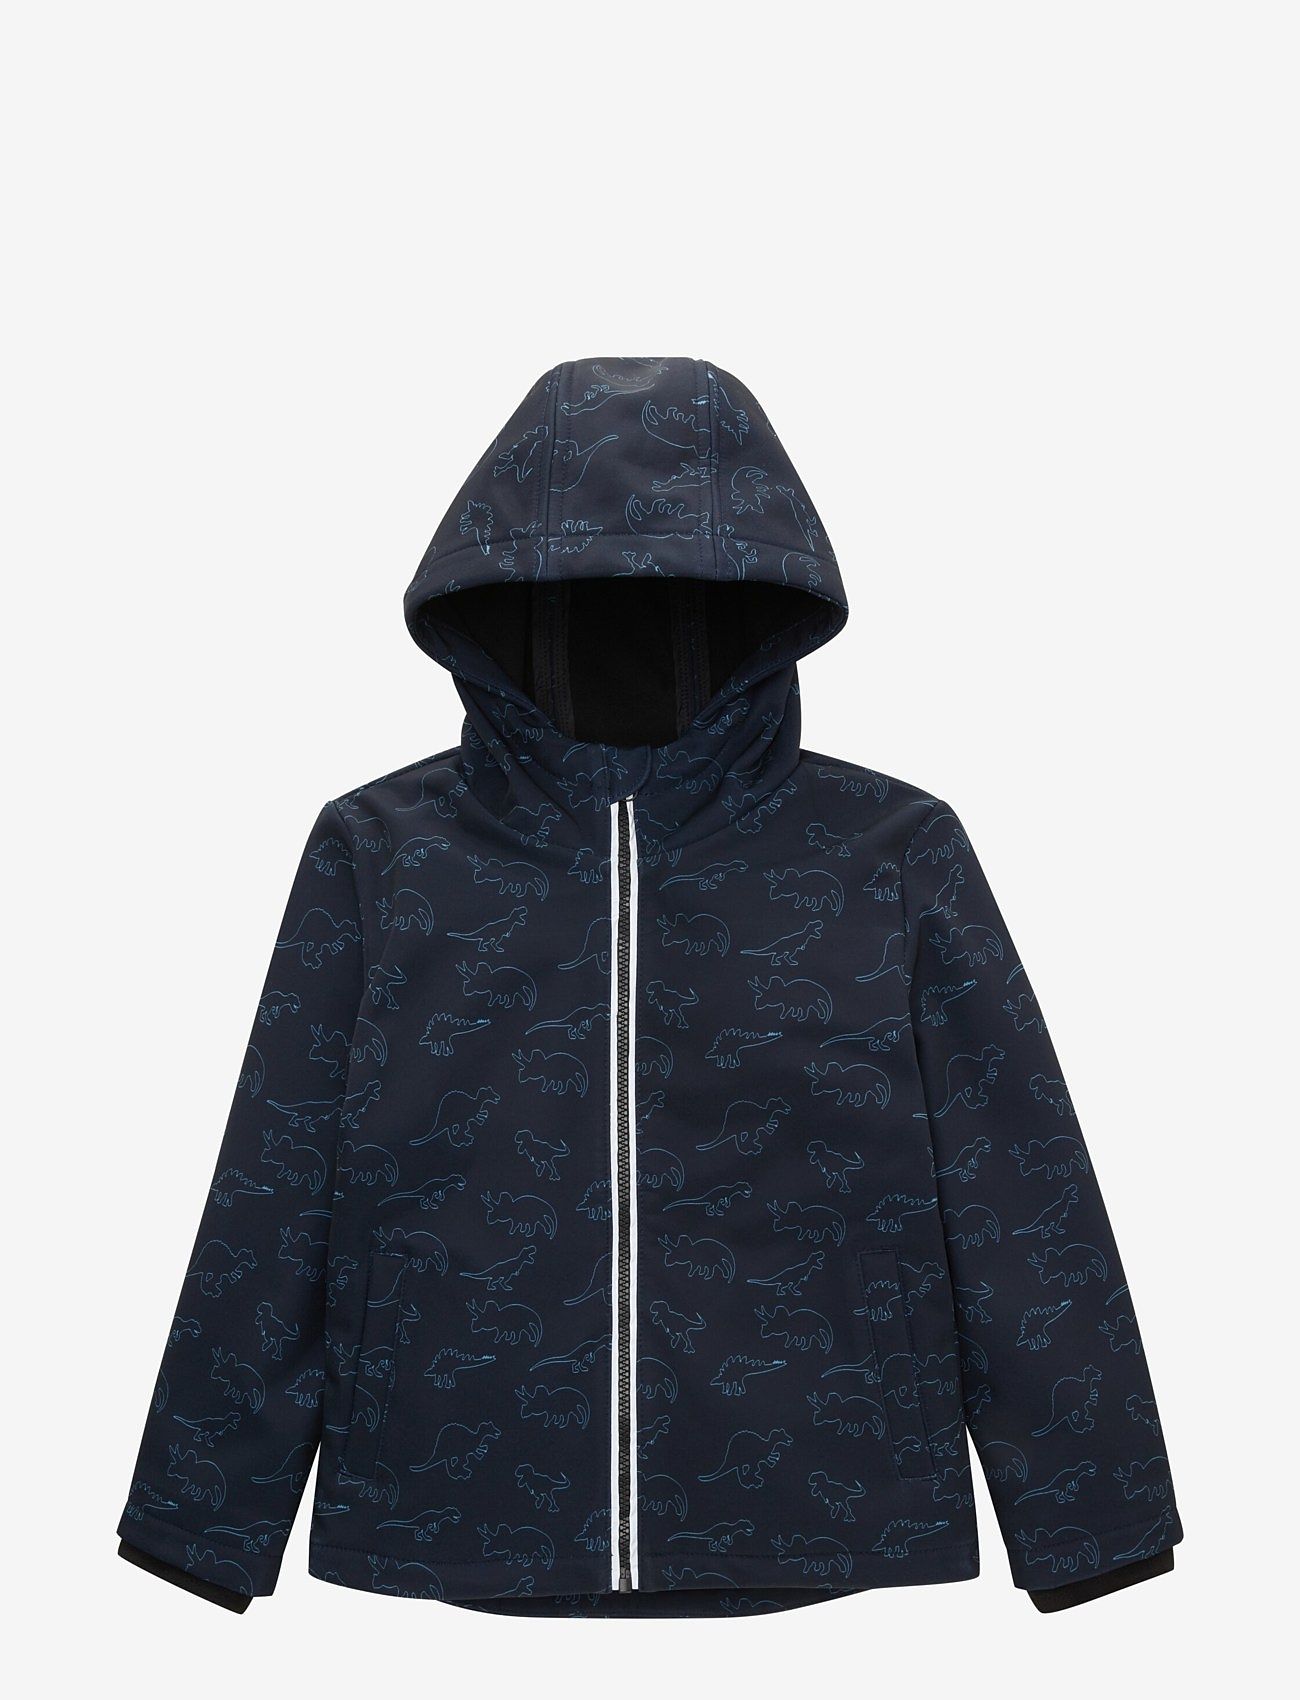 Tom Tailor - softshell jacket - dzieci - navy blue outlined dino aop - 0